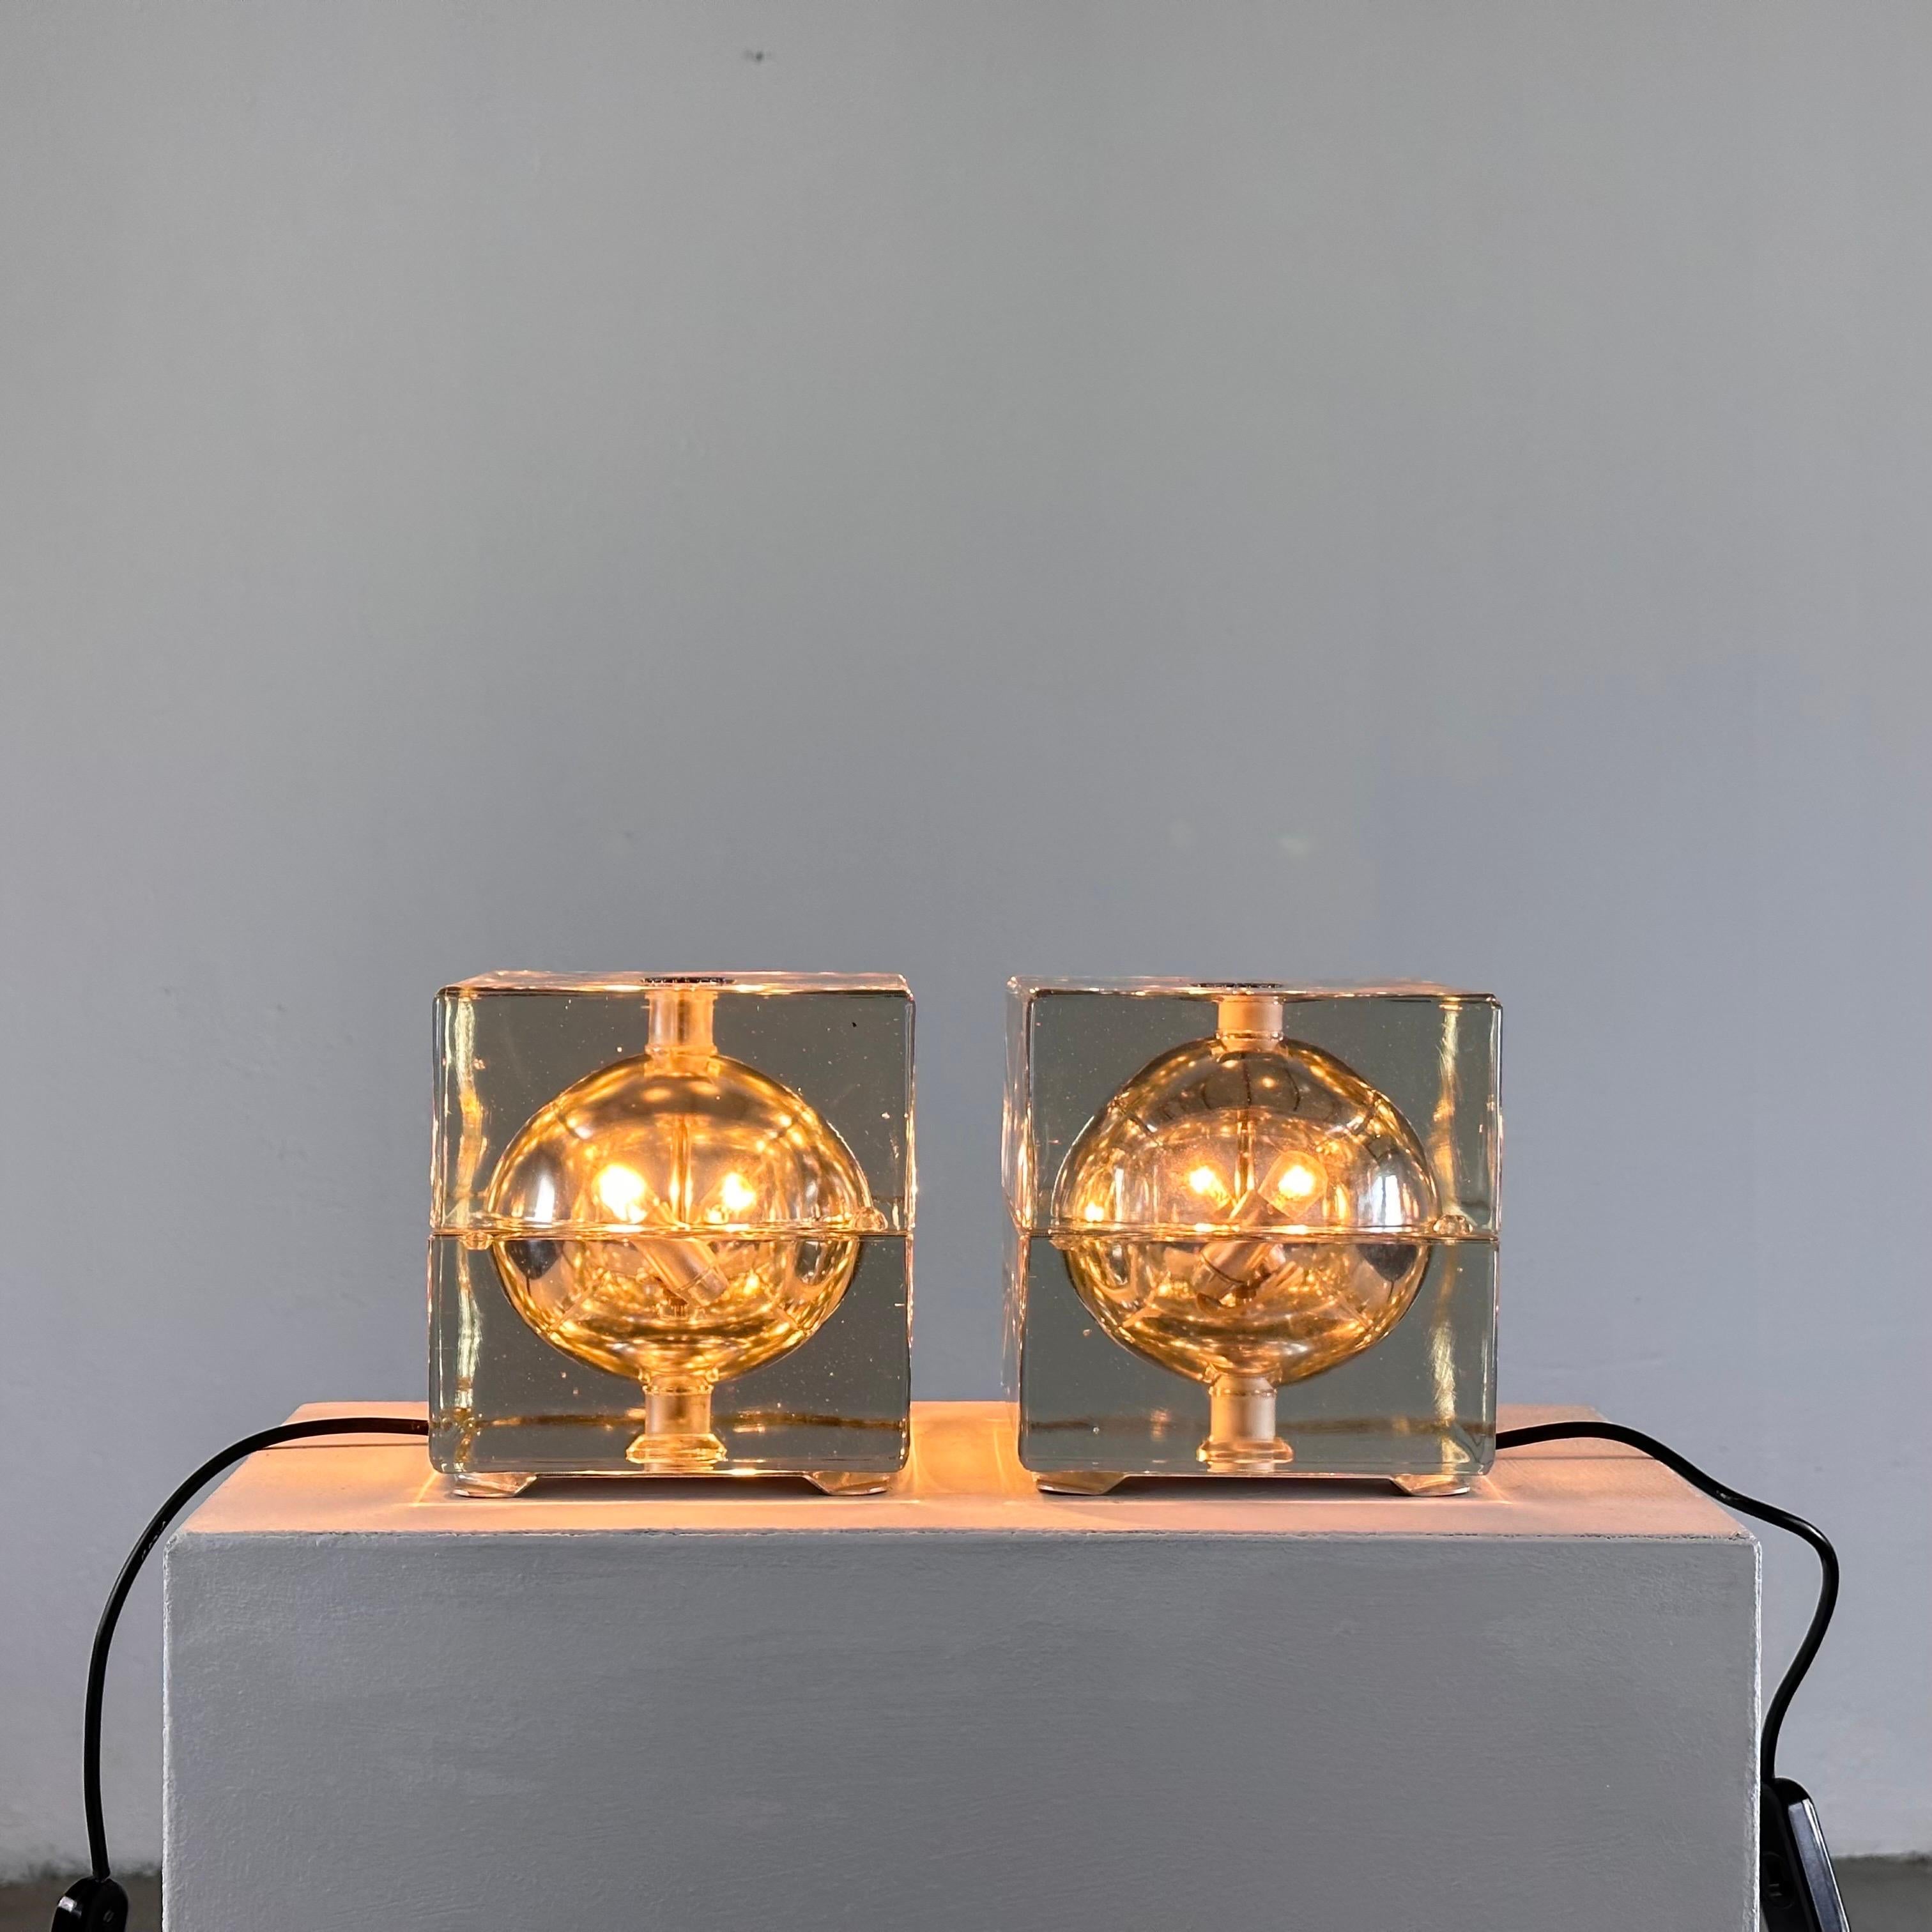 Illuminate your space with iconic mid-century charm embodied in this remarkable pair of Cubosfera table lamps, designed by the legendary Alessandro Mendini for Fidenza Vetraria in the 1960s. These timeless pieces are a testament to Mendini's